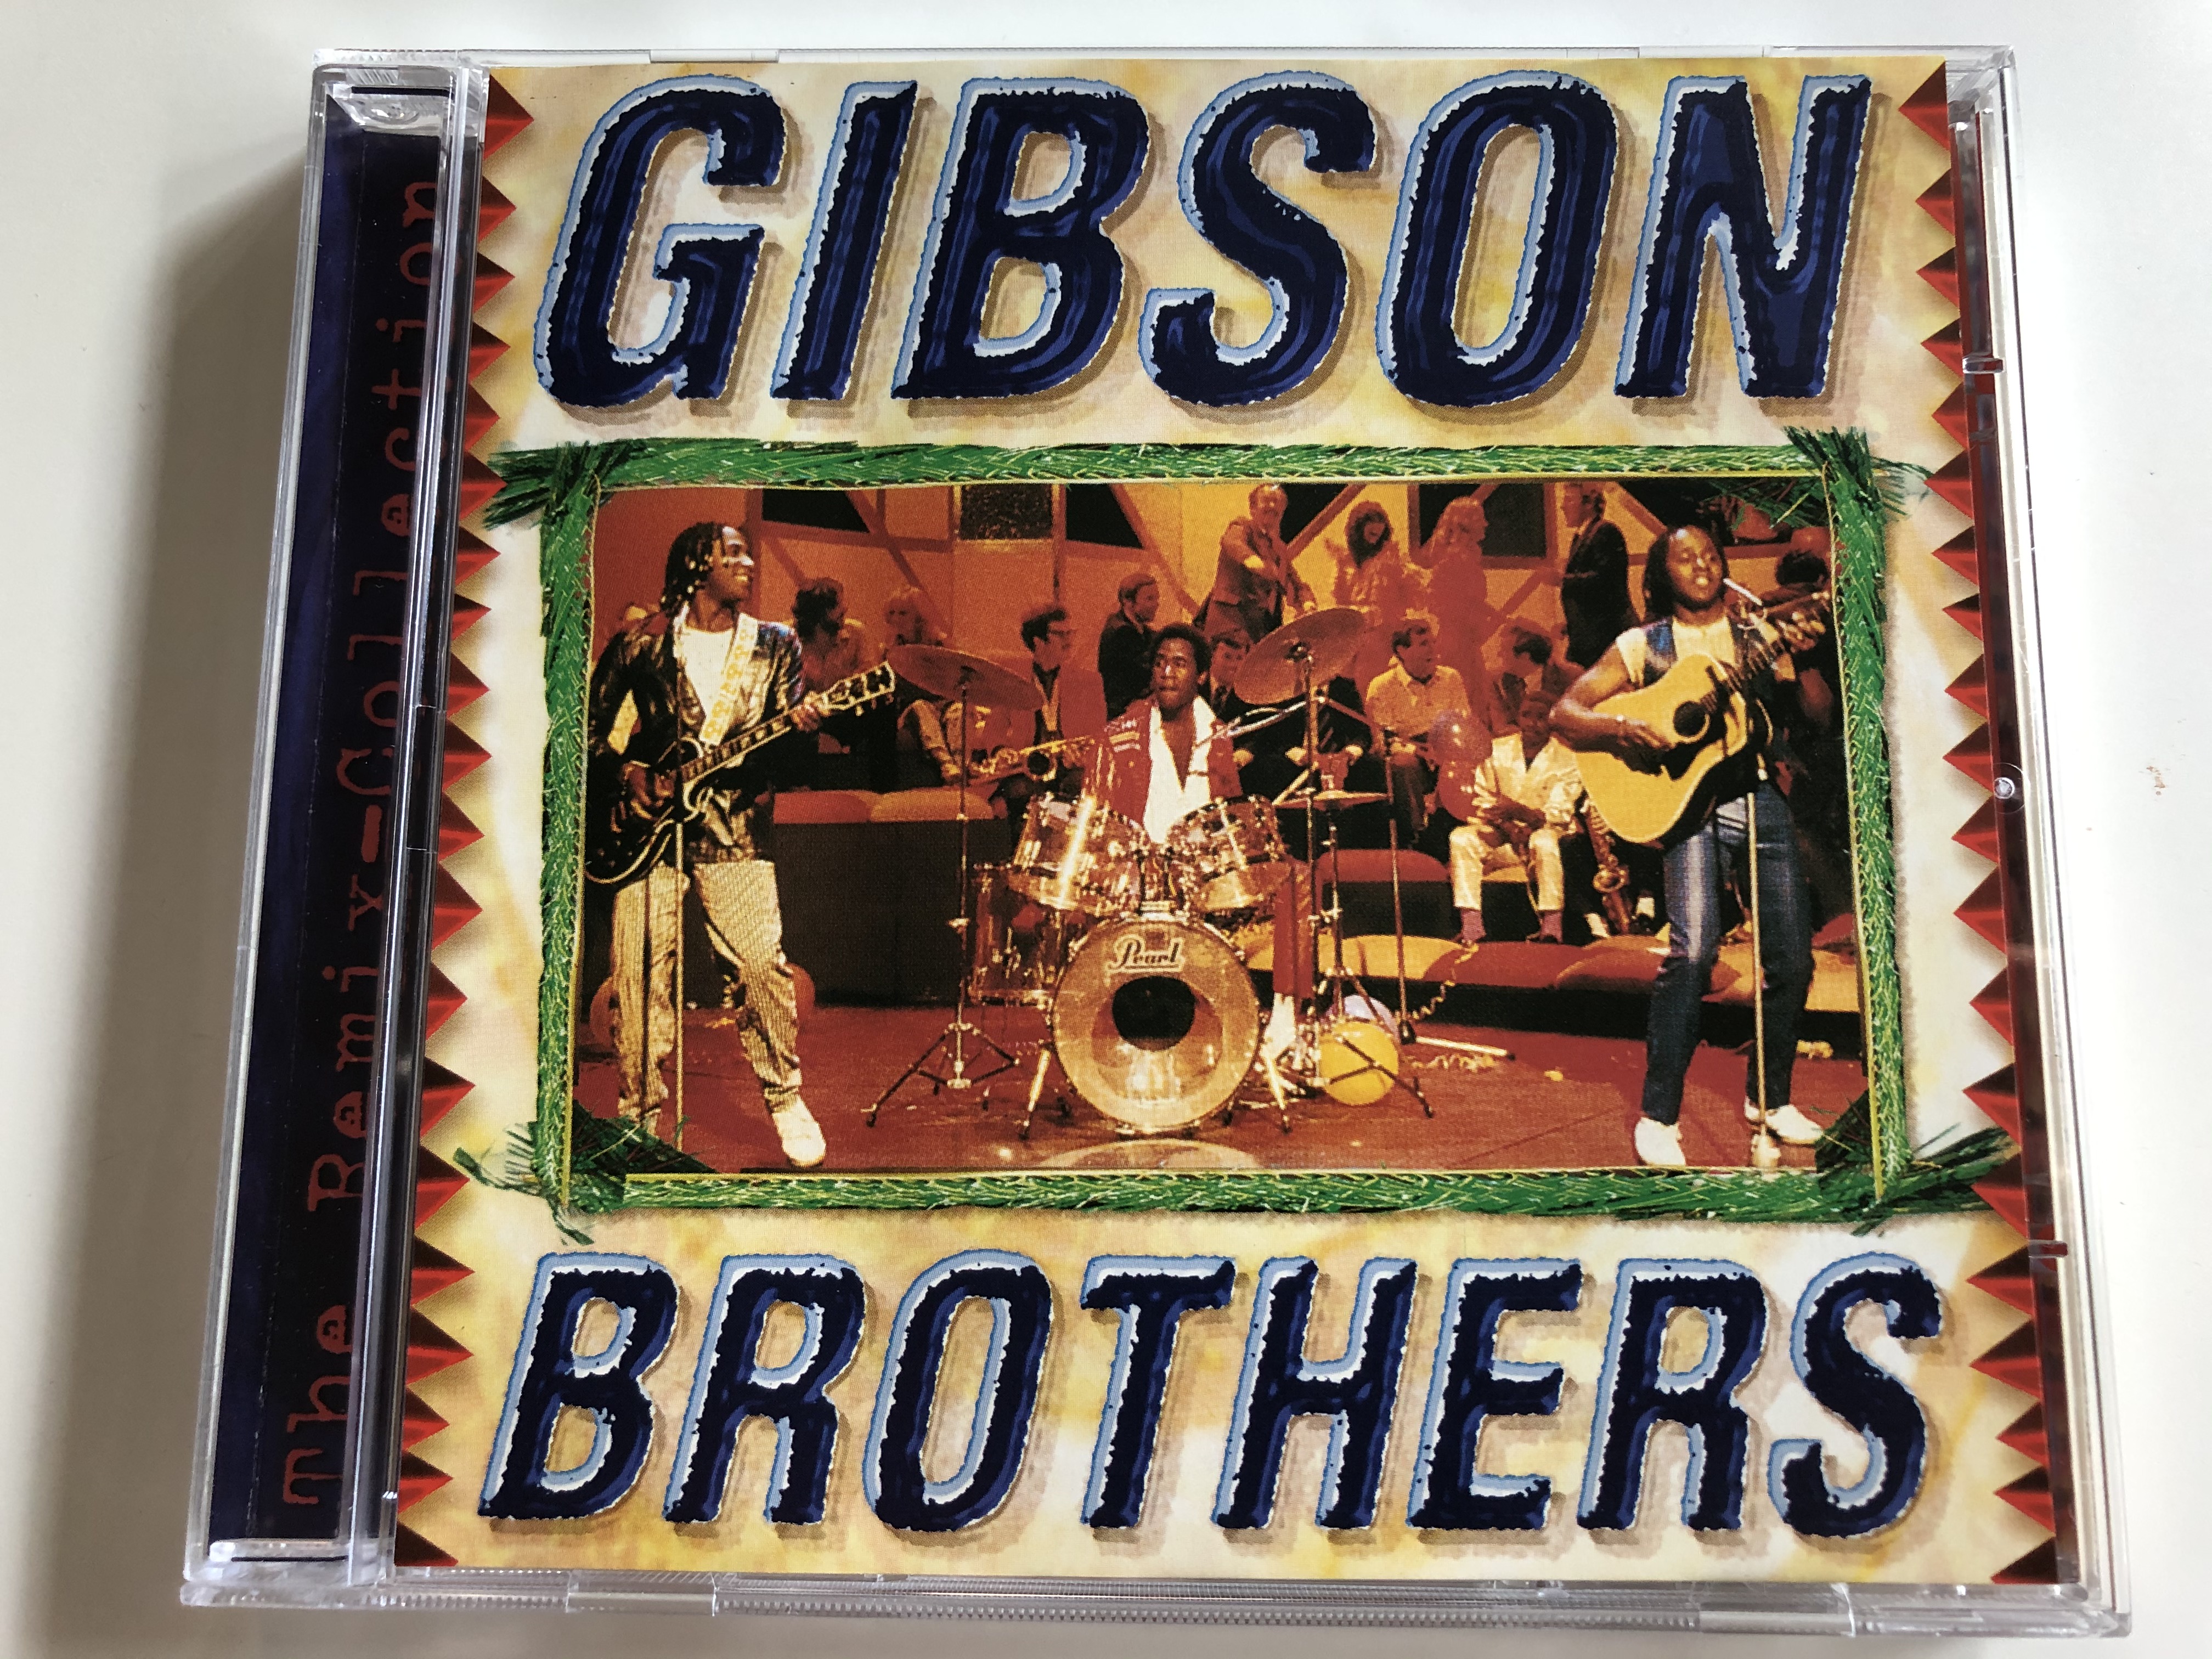 gibson-brothers-the-remix-collection-eurotrend-audio-cd-stereo-cd-152-1-.jpg